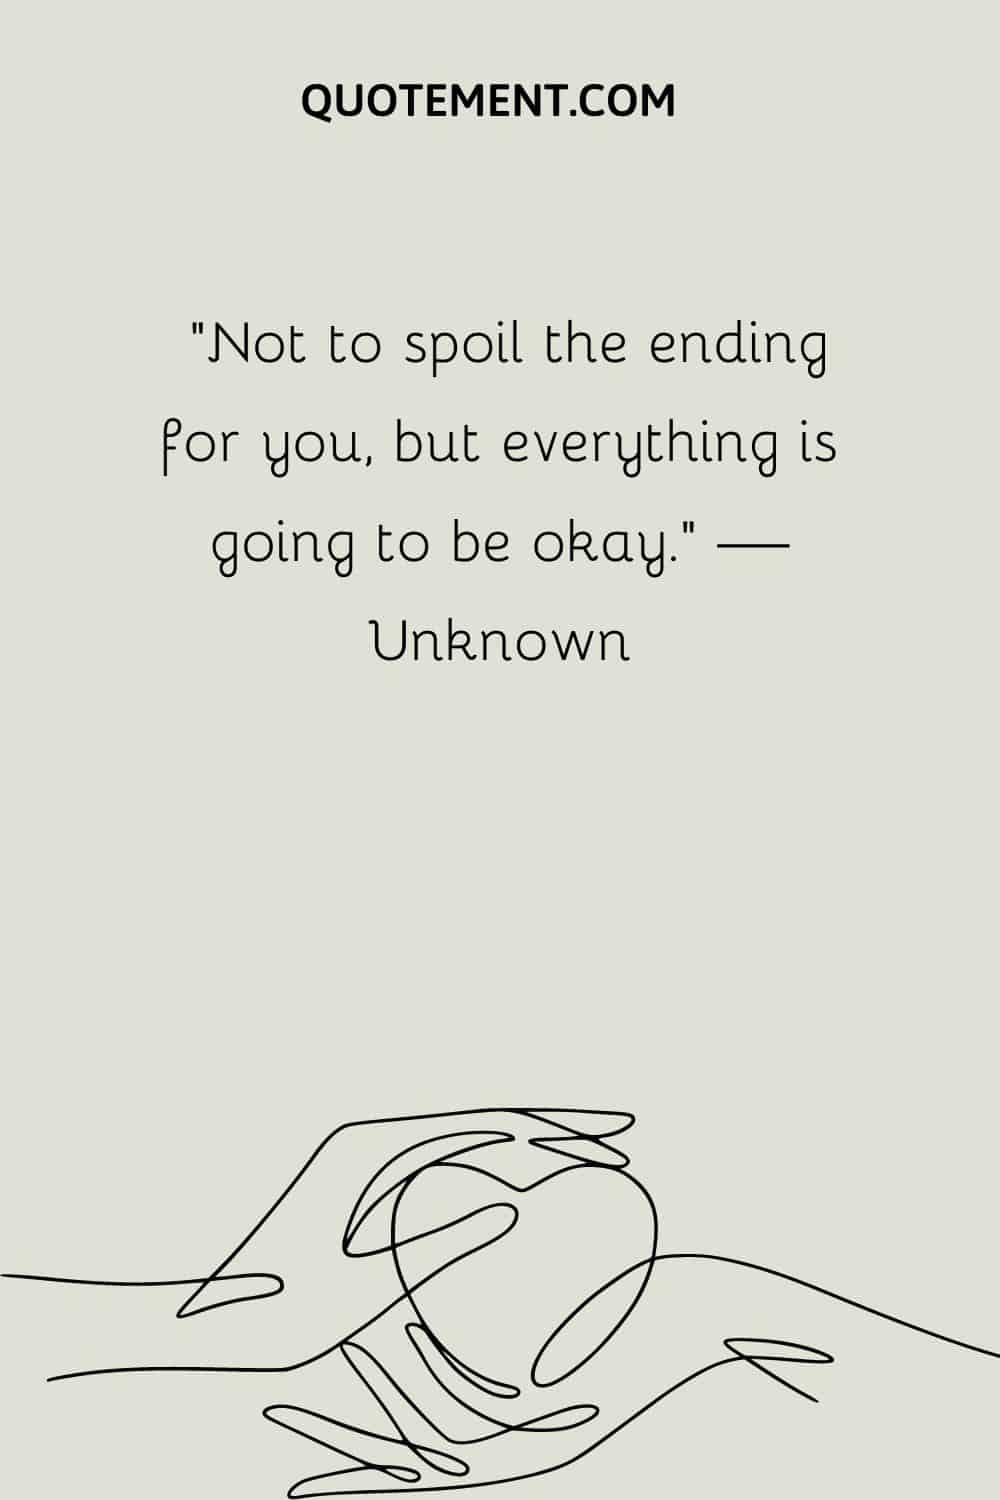 “Not to spoil the ending for you, but everything is going to be okay.” — Unknown